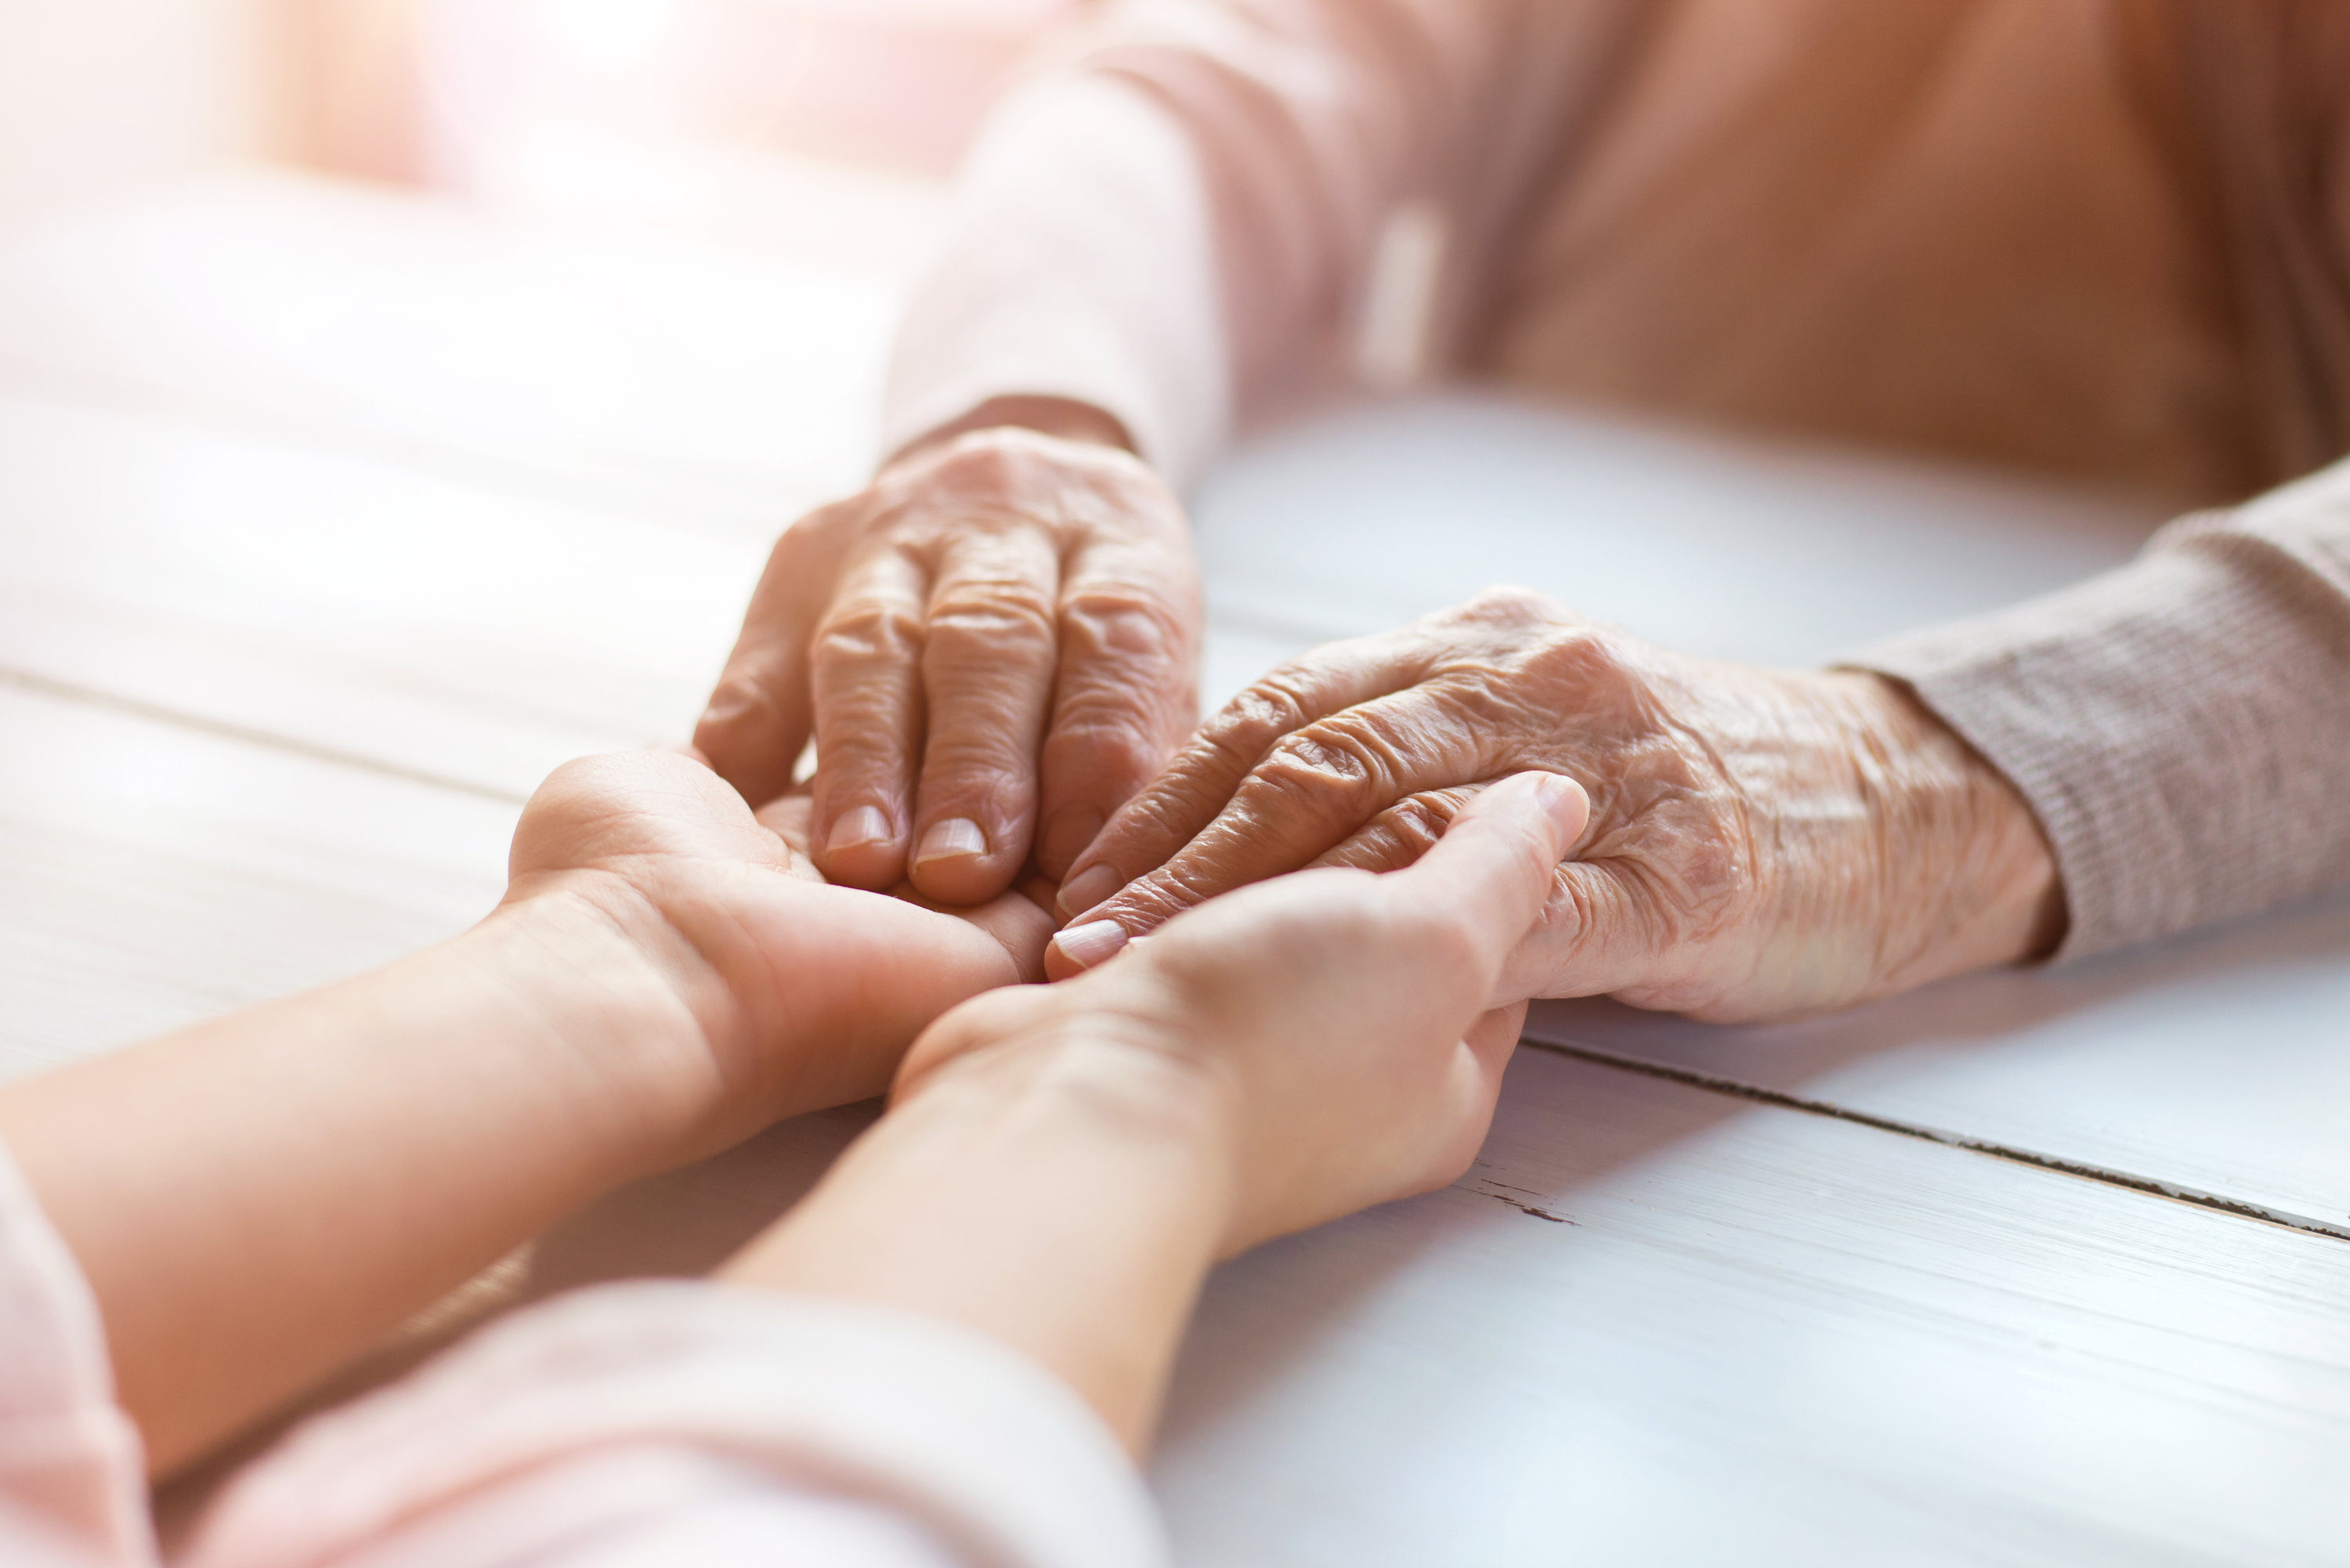 Around 75 percent of individuals with Down syndrome aged 65 and older develop Alzheimer’s, making the role of their caregivers even more complex as they age